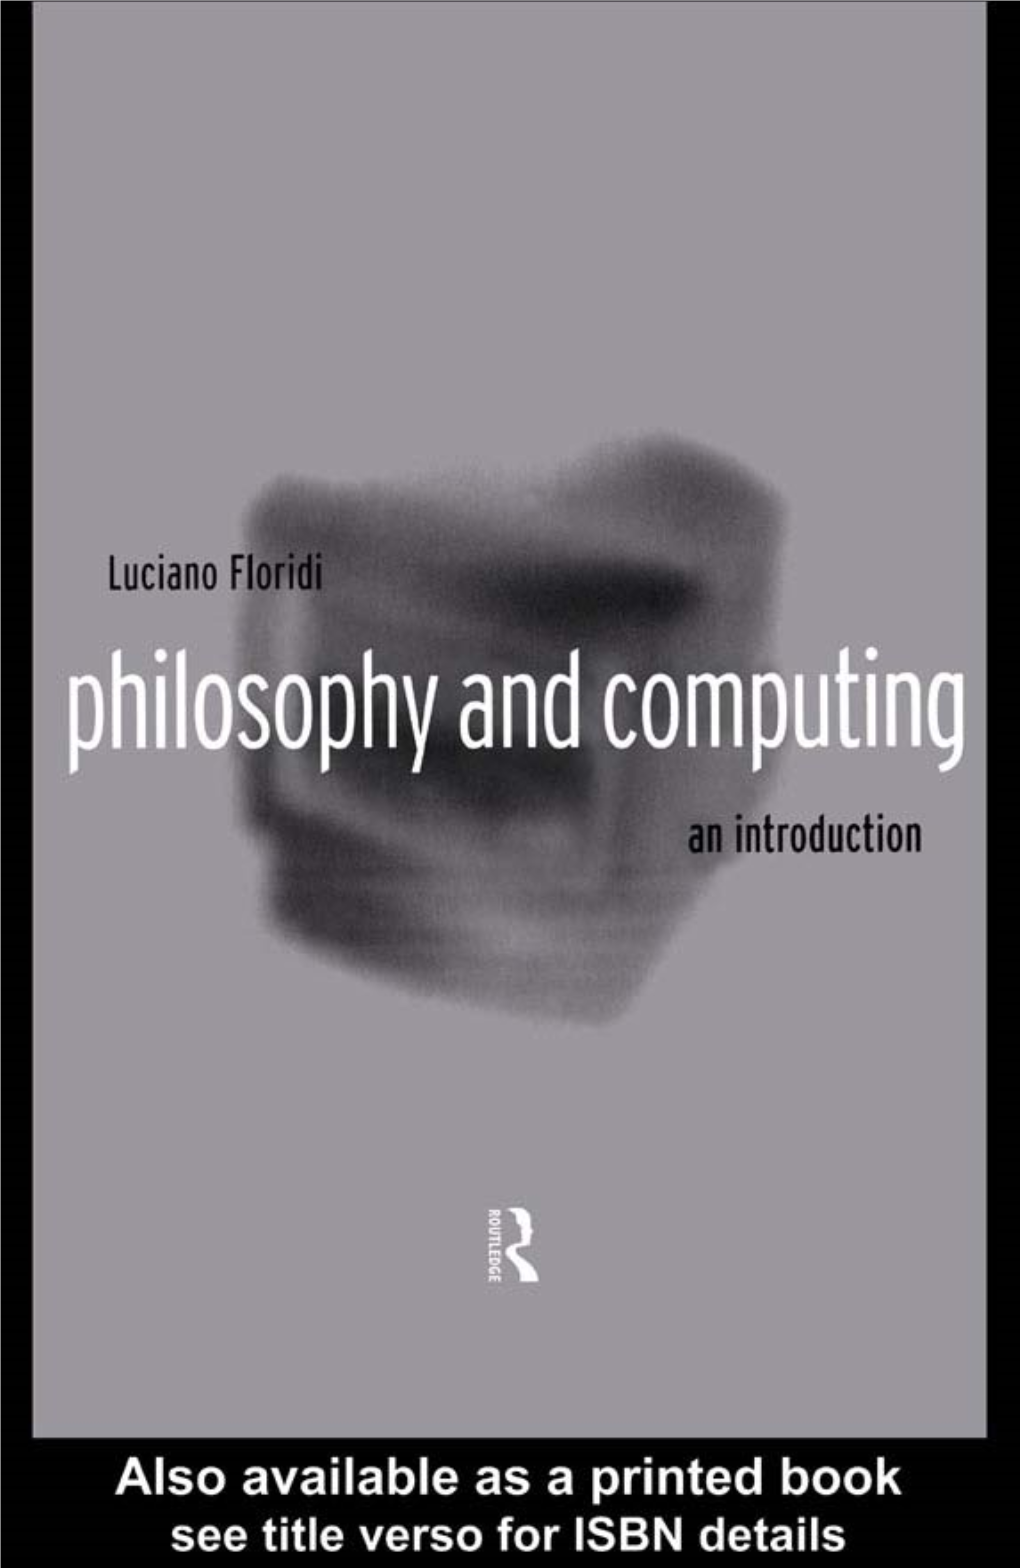 Philosophy and Computing: an Introduction / Luciano Floridi